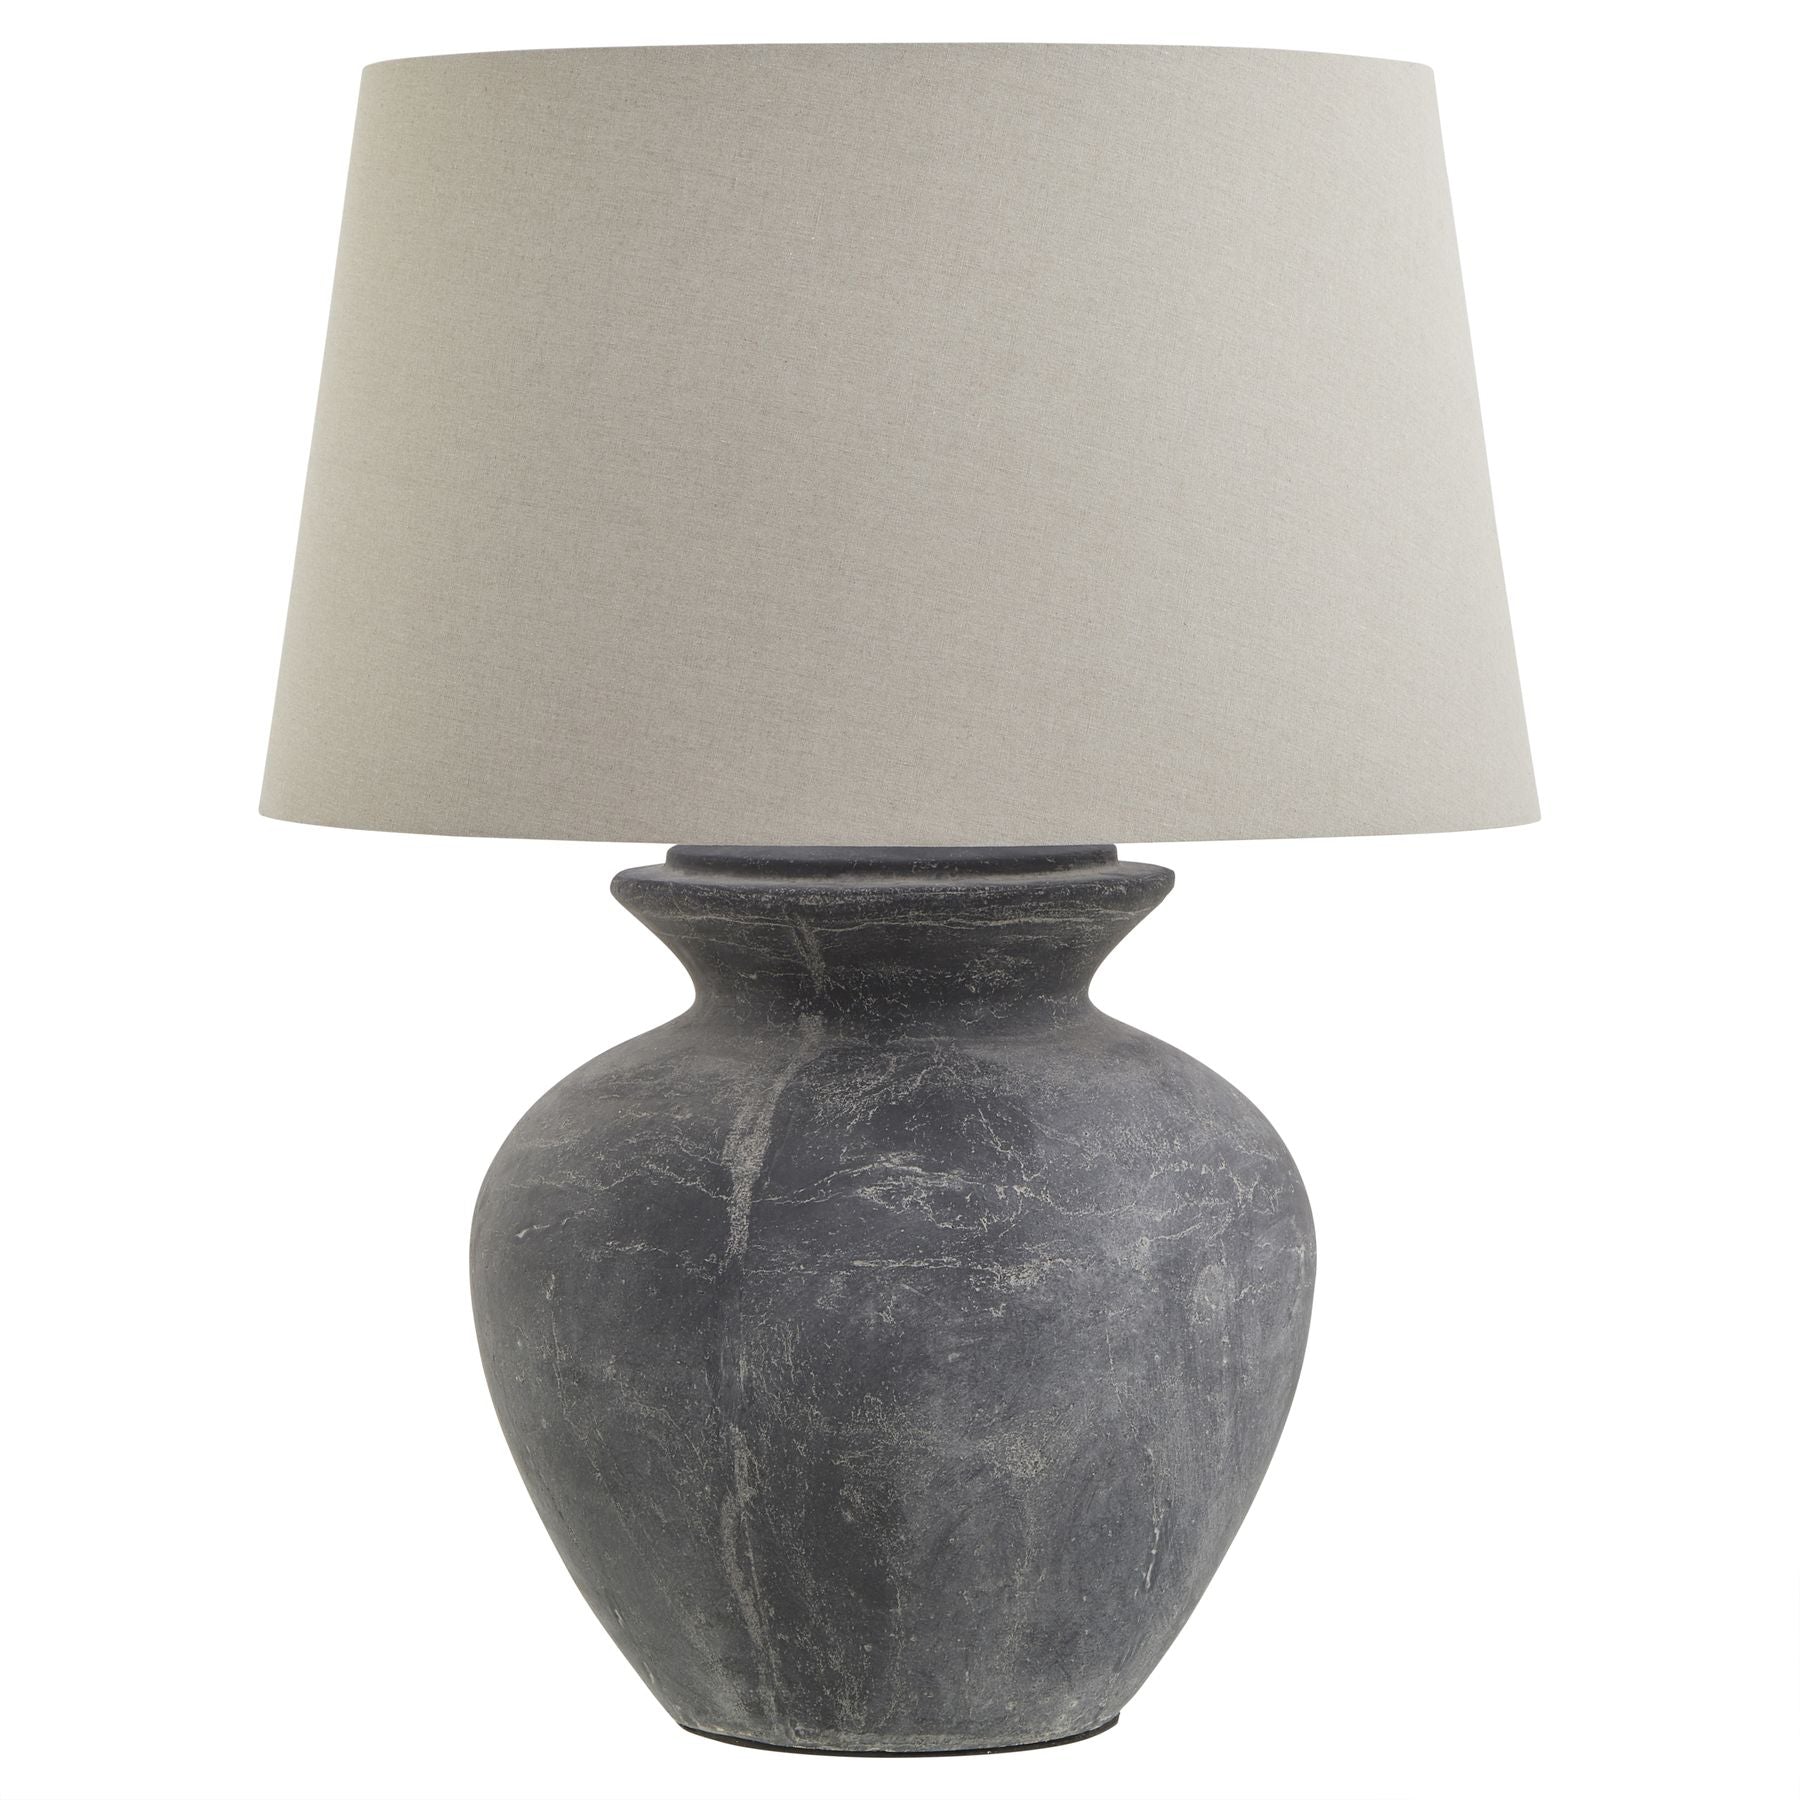 View Amalfi Grey Round Table Lamp With Linen Shade information